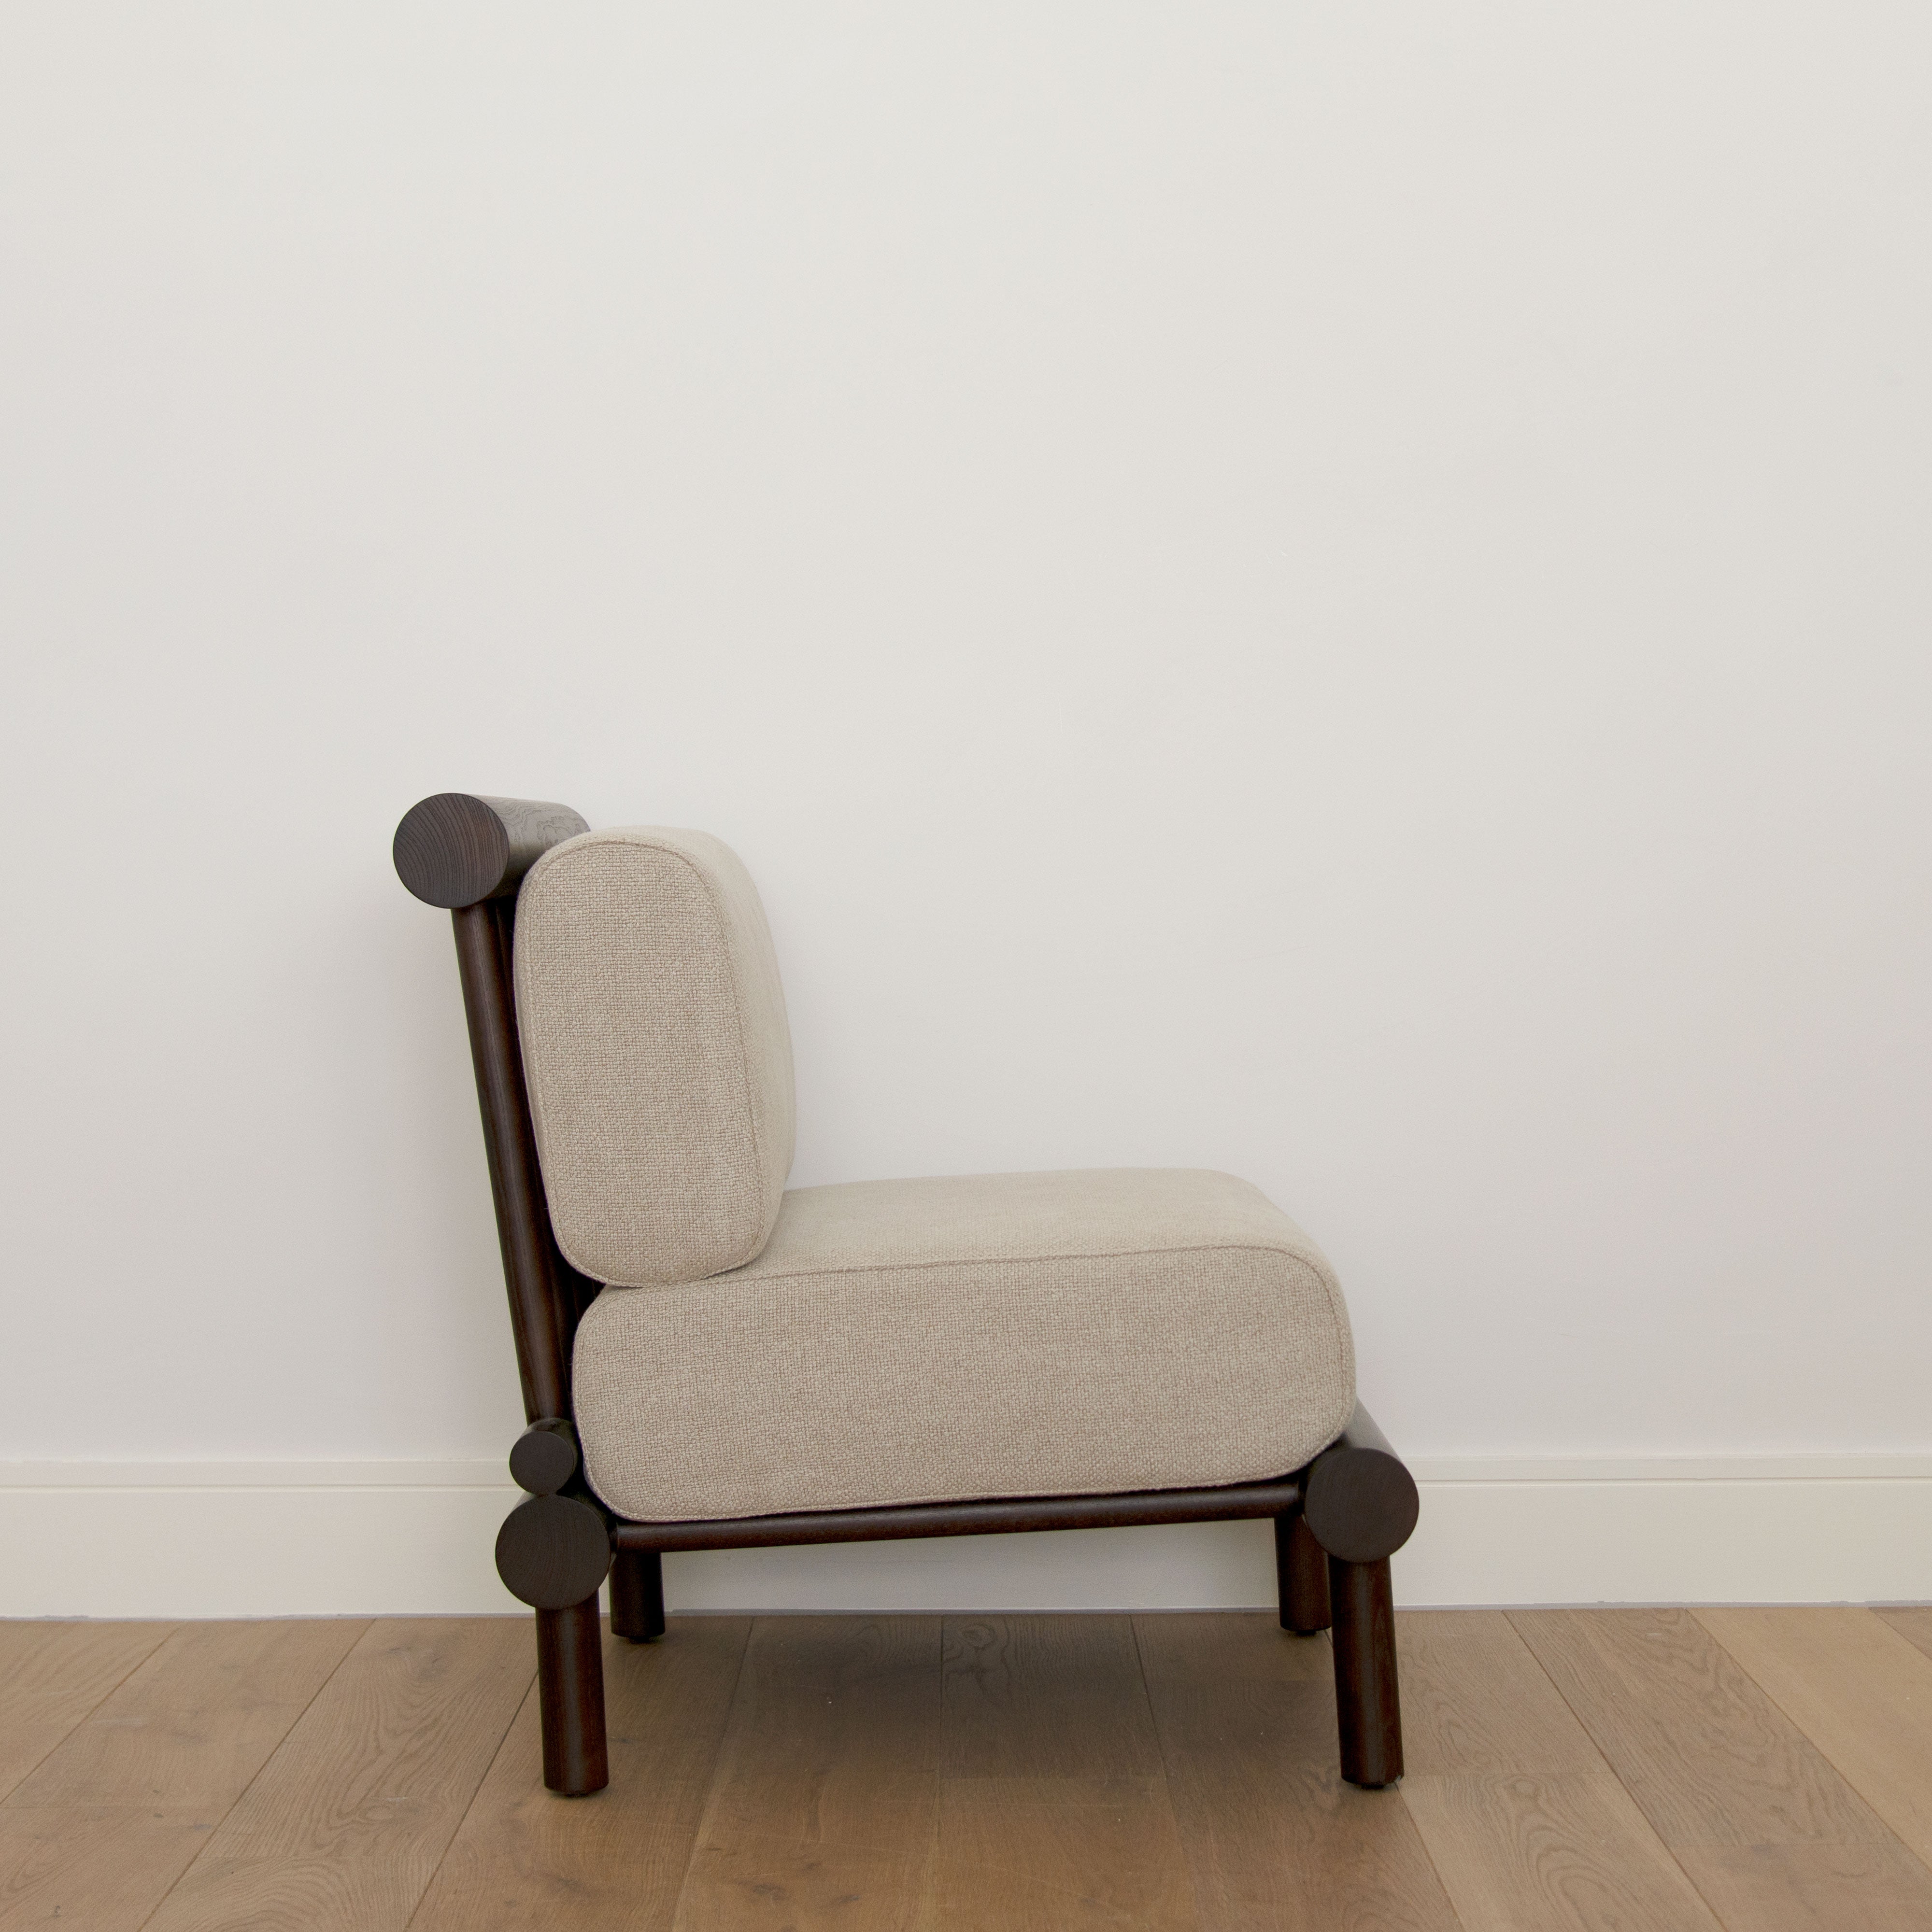 Side view of the Khayni Oren in Soft Clay lounge chair